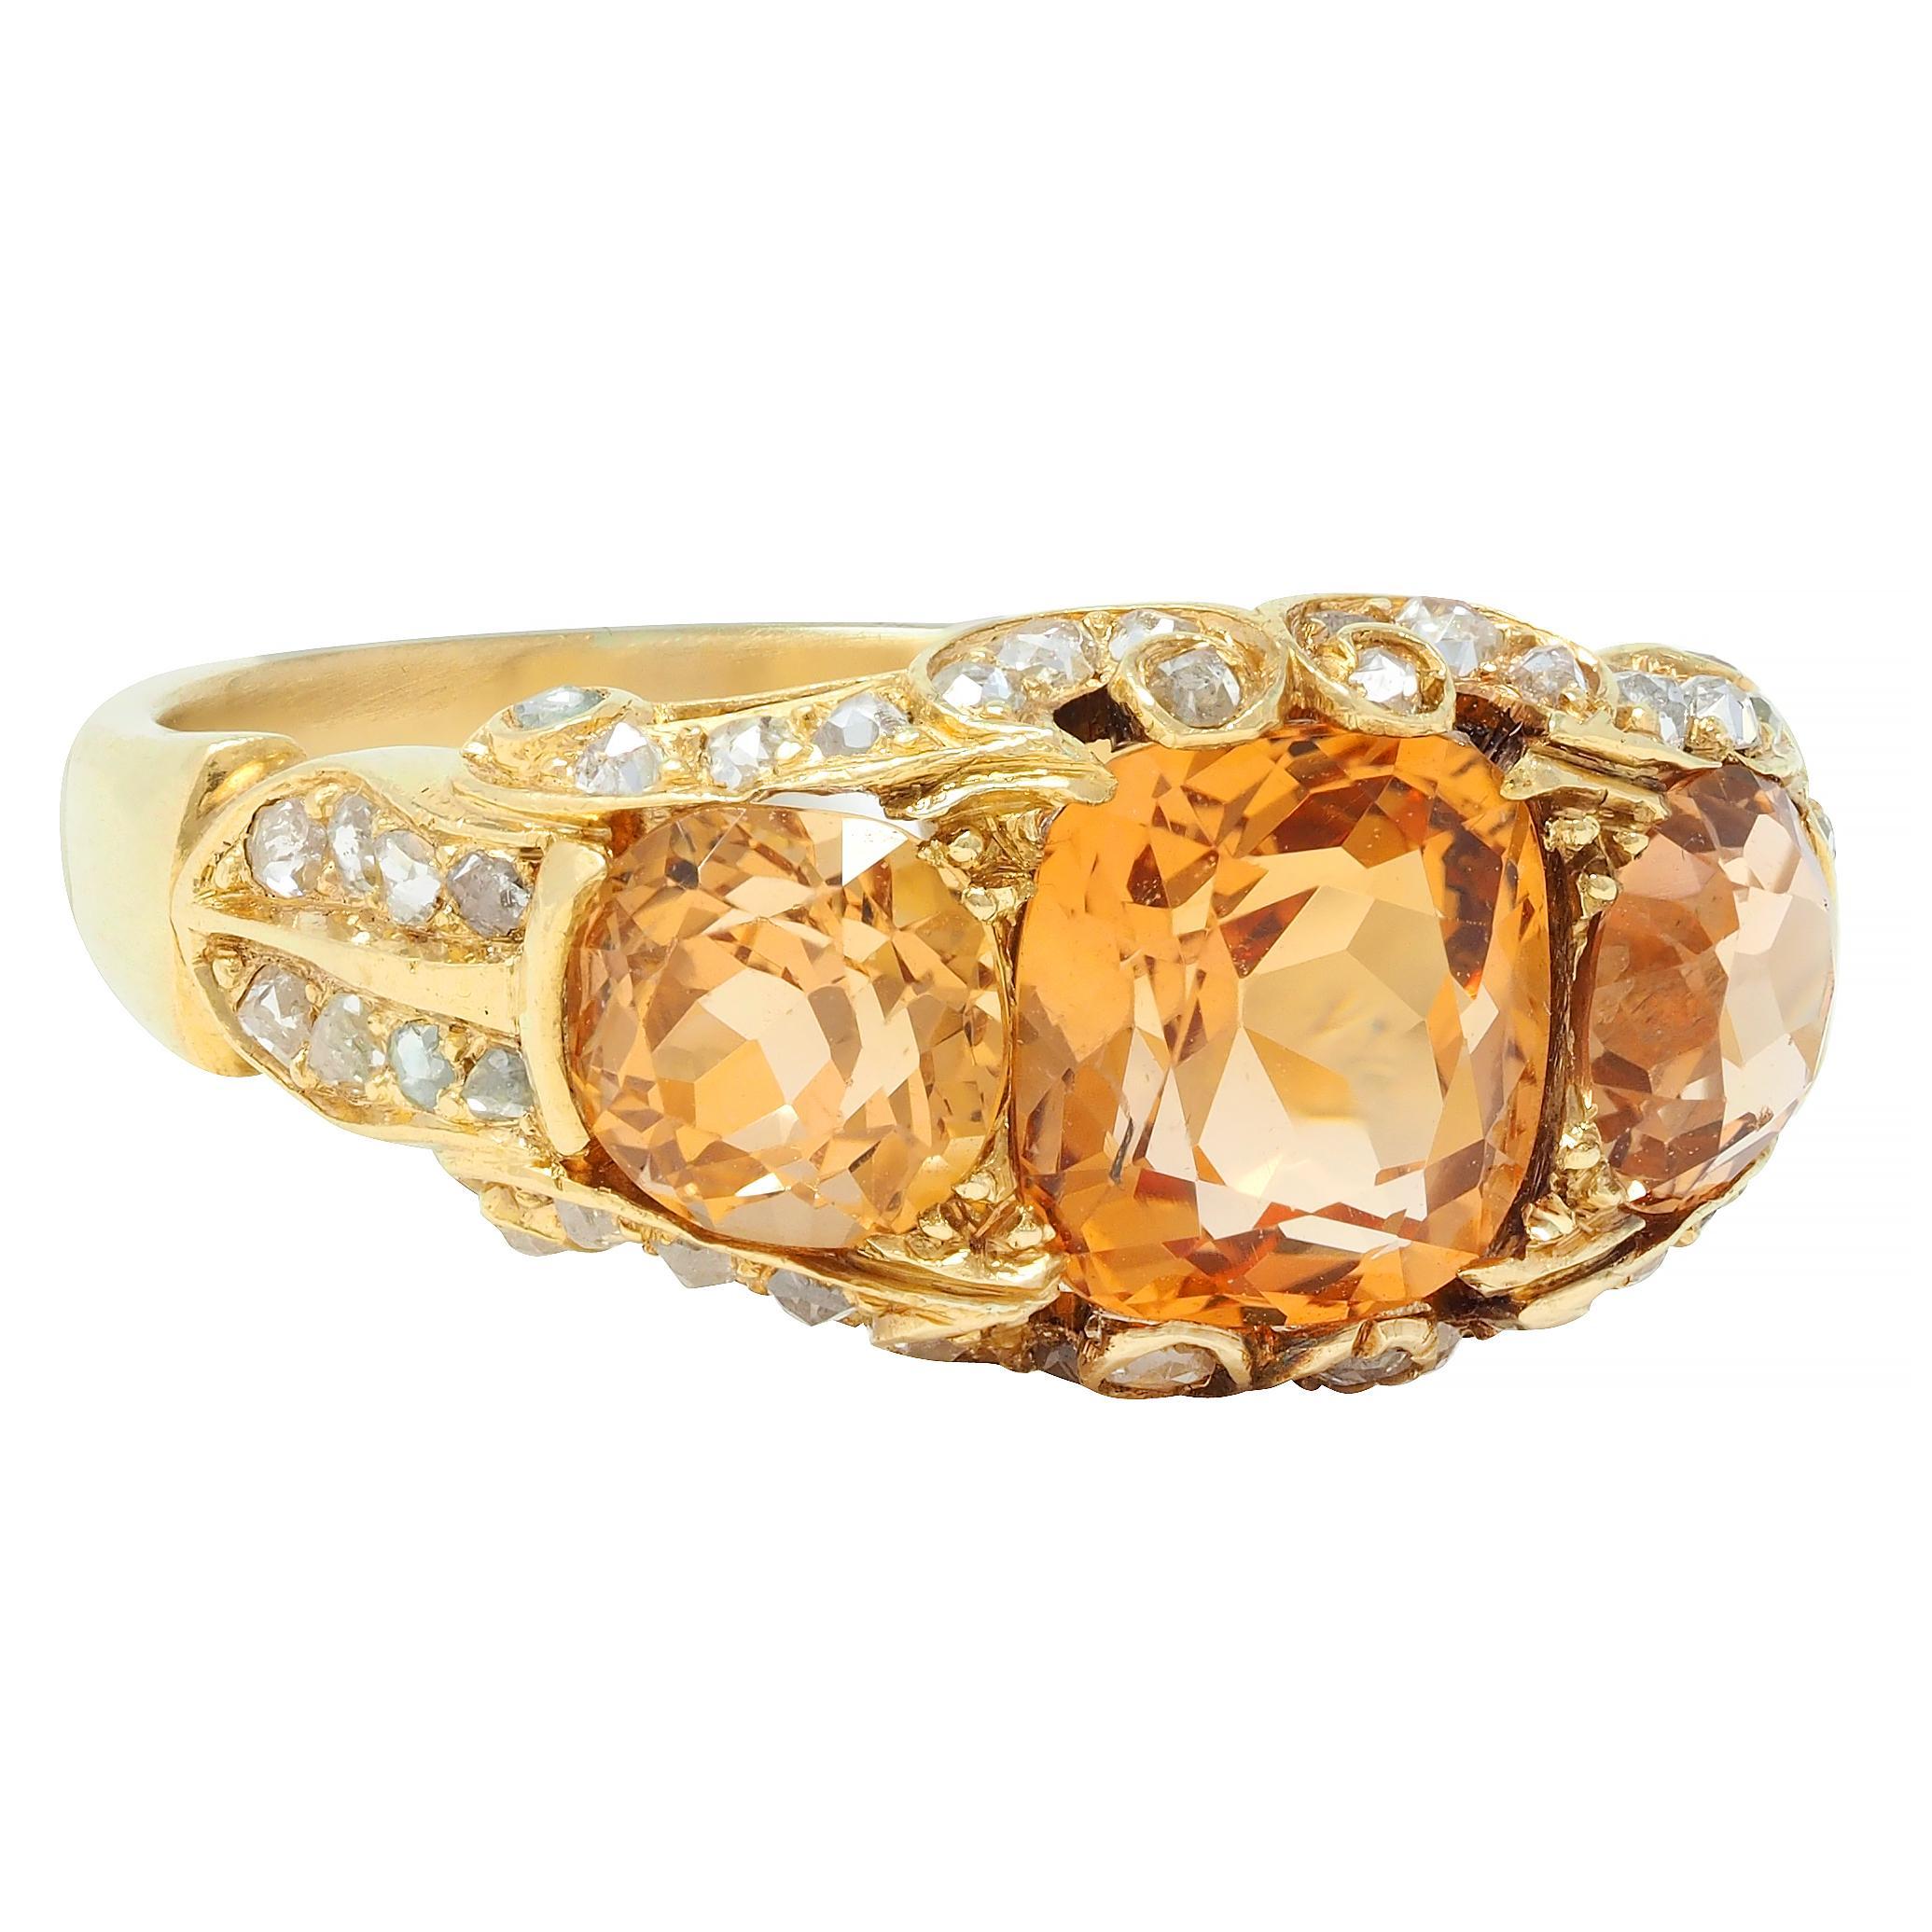 Centering a prong set cushion cut topaz weighing approximately 1.96 carats total 
Flanked by round mixed-cut topaz weighing approximately 1.60 carats total 
Transparent medium pinkish-orange to orange in color 
Prong set east to west with a pierced